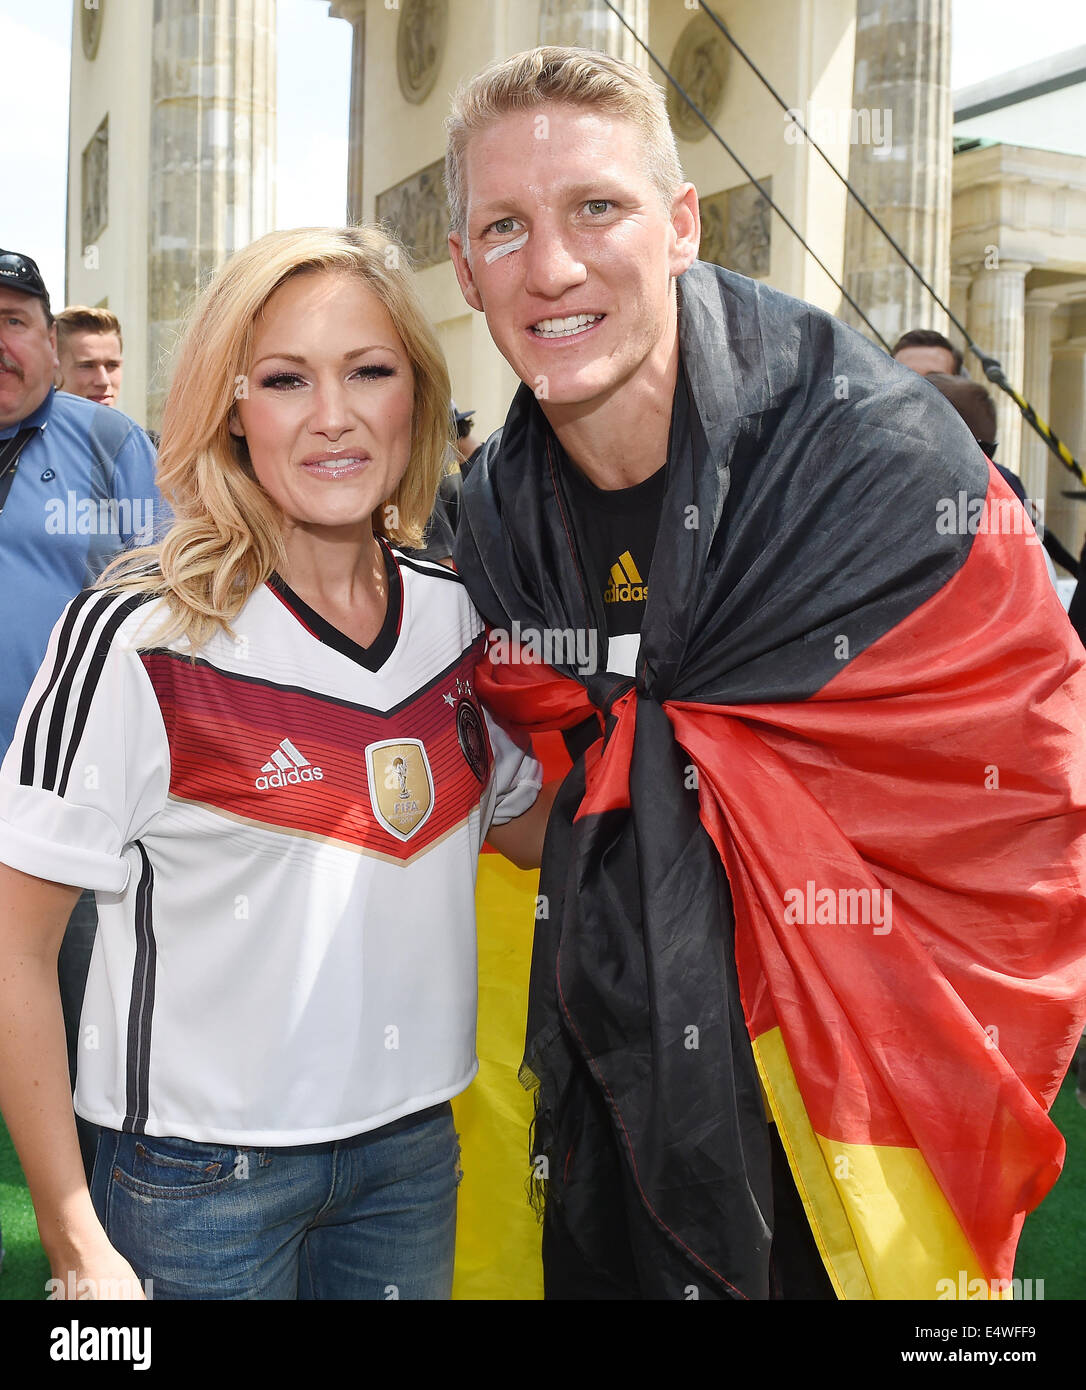 Singer Helene Fischer and Germany's Bastian Schweinsteiger during the World  Cup party after team German arrived back in German in front of the  Brandenburg Gate in Berlin, Germany, 15 July 2014. The